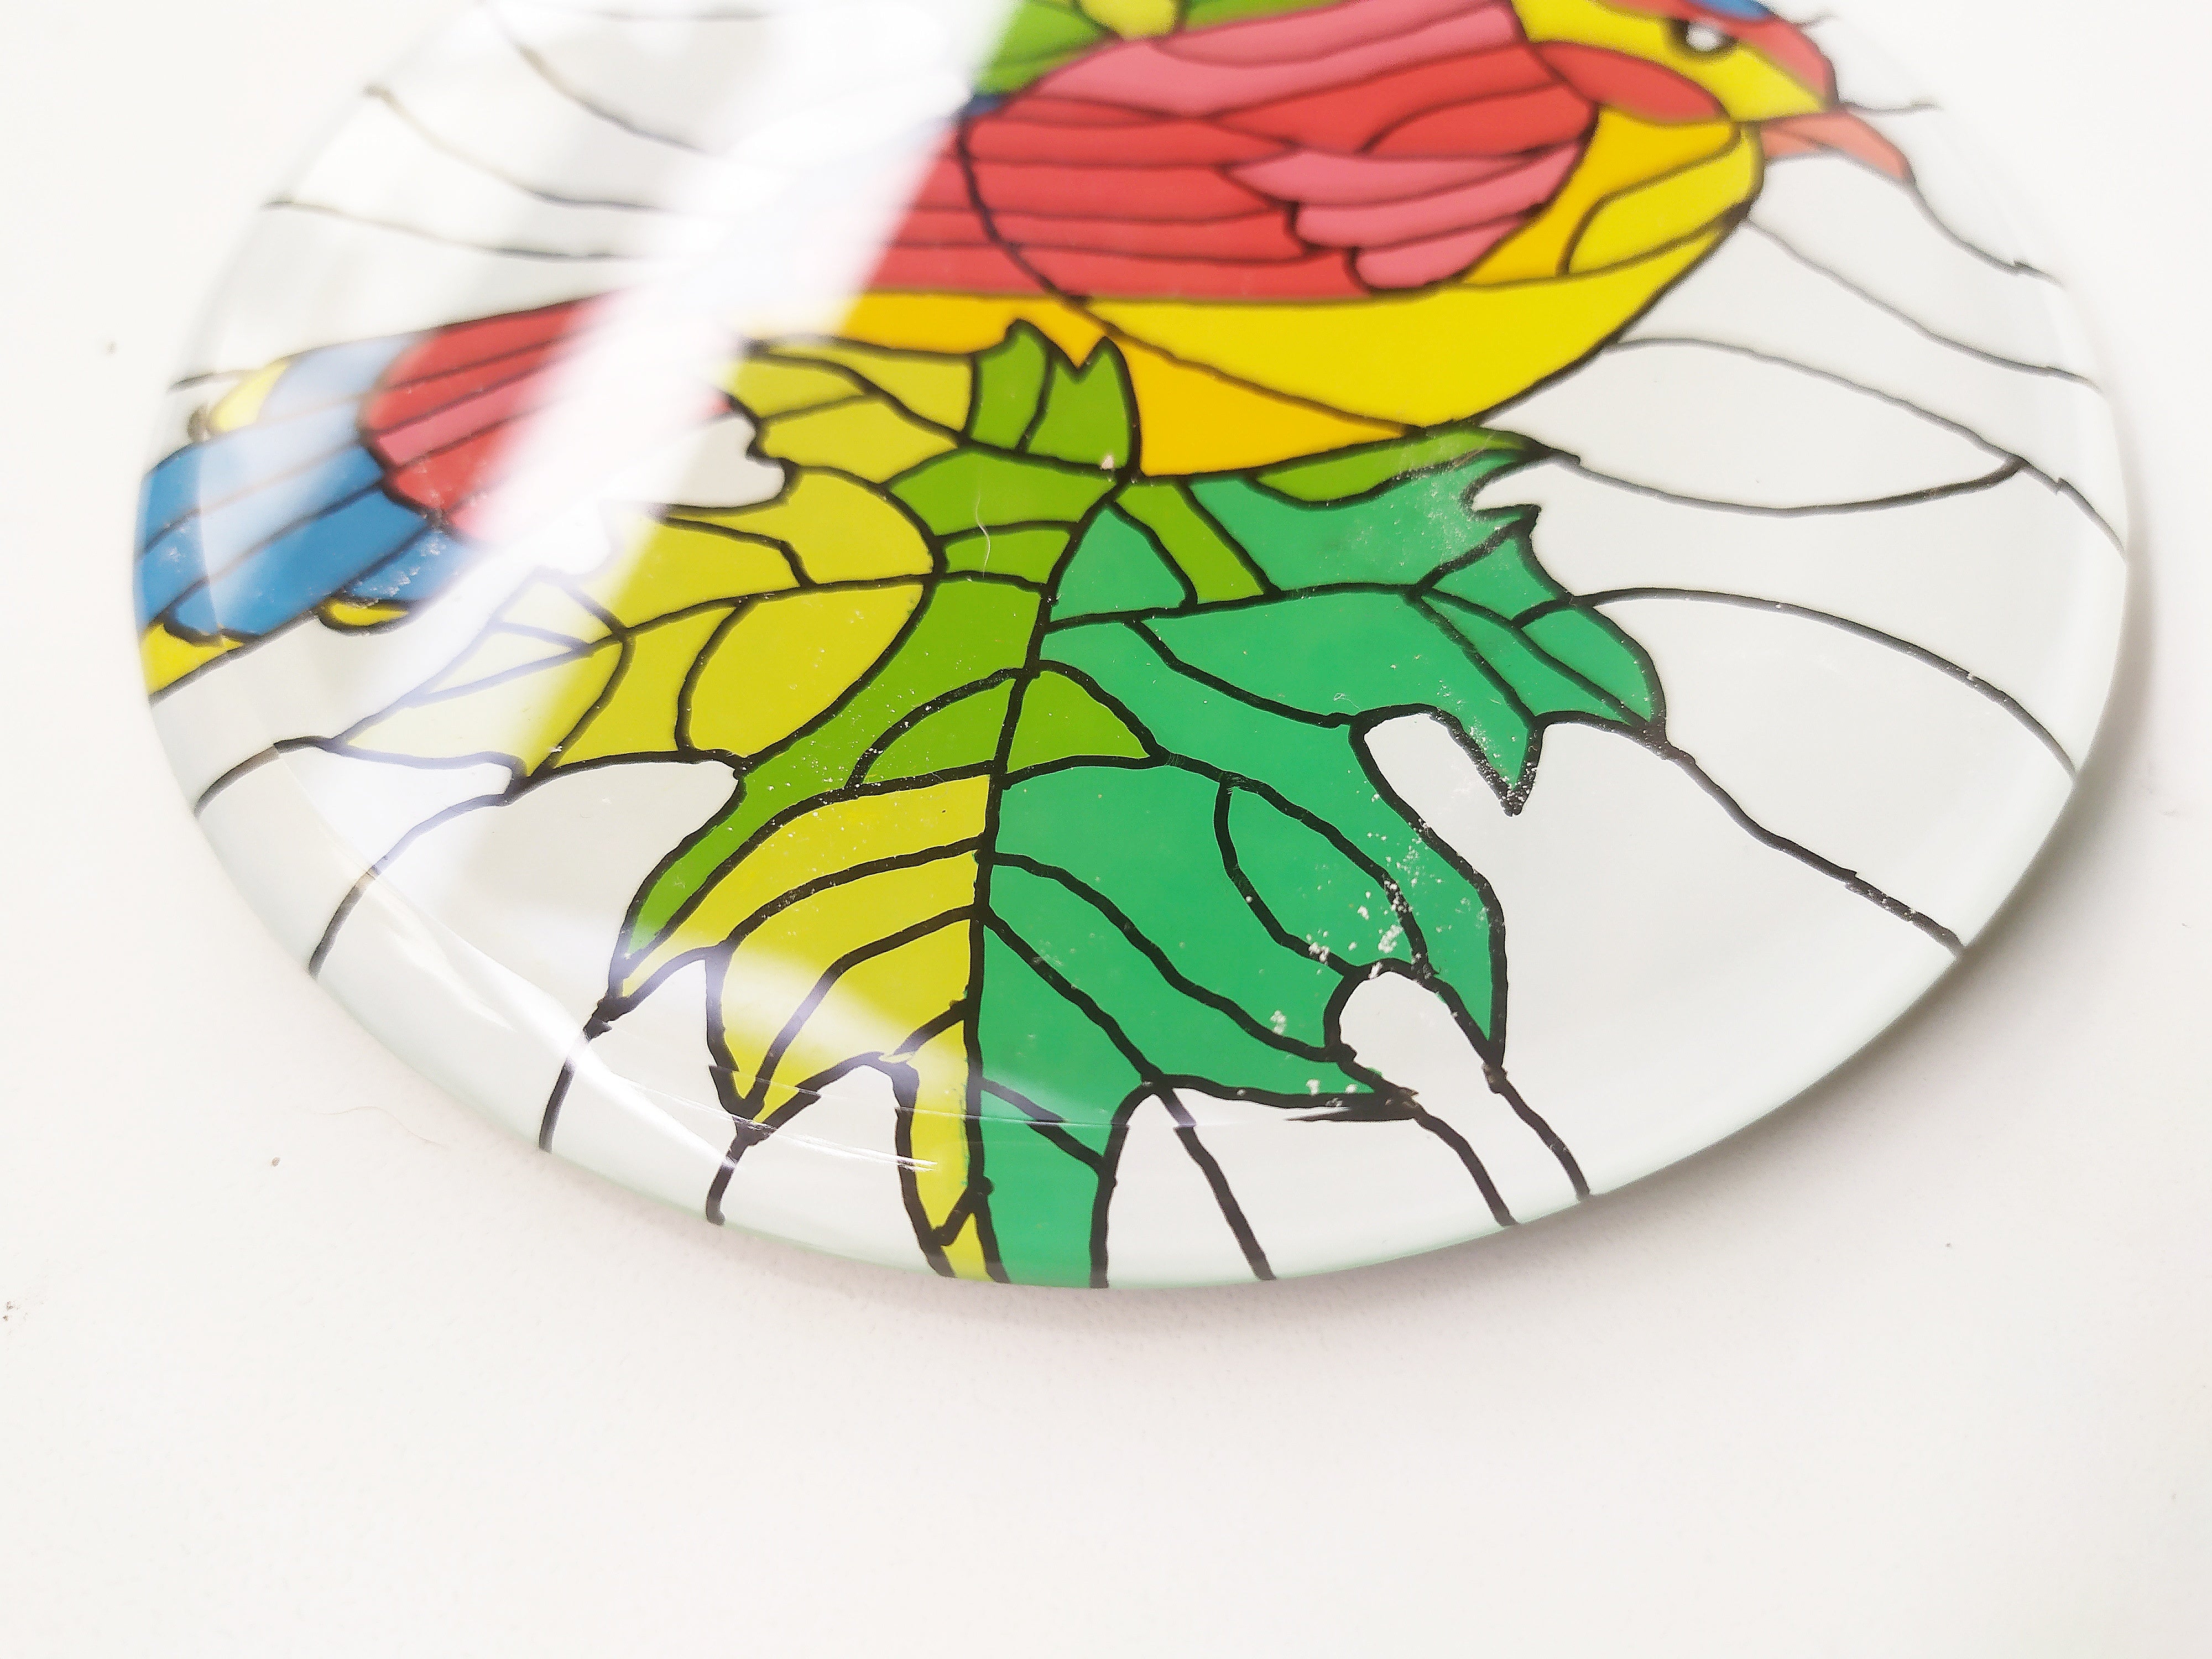 Hand painted bird animal round glass mirror coaster , zoomed for details